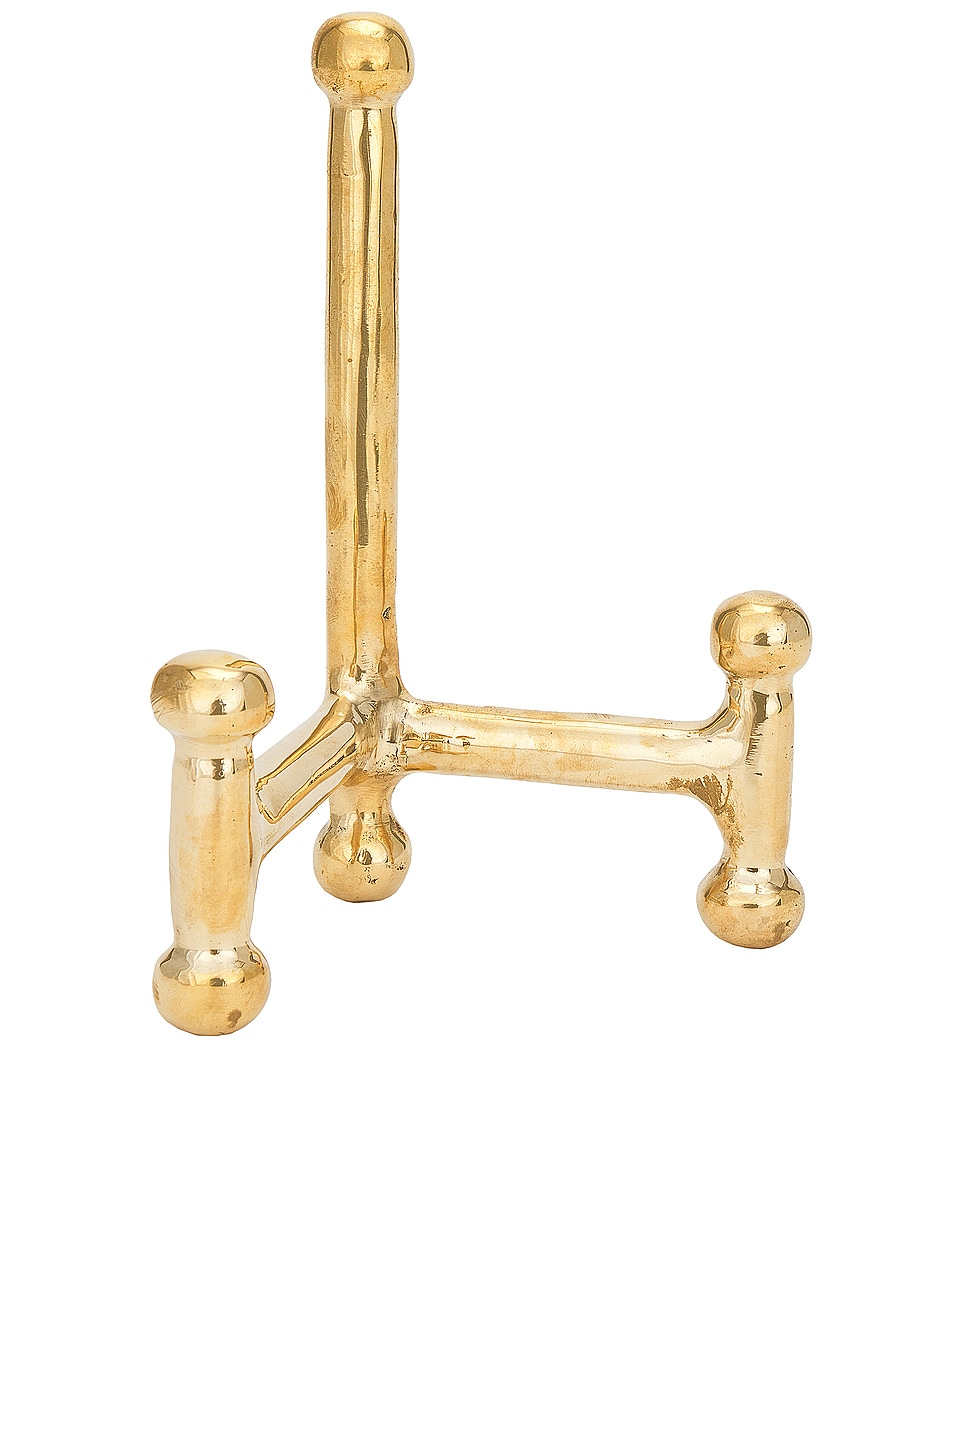 Image 1 of Anastasio Home Small Desk Easel in Brass